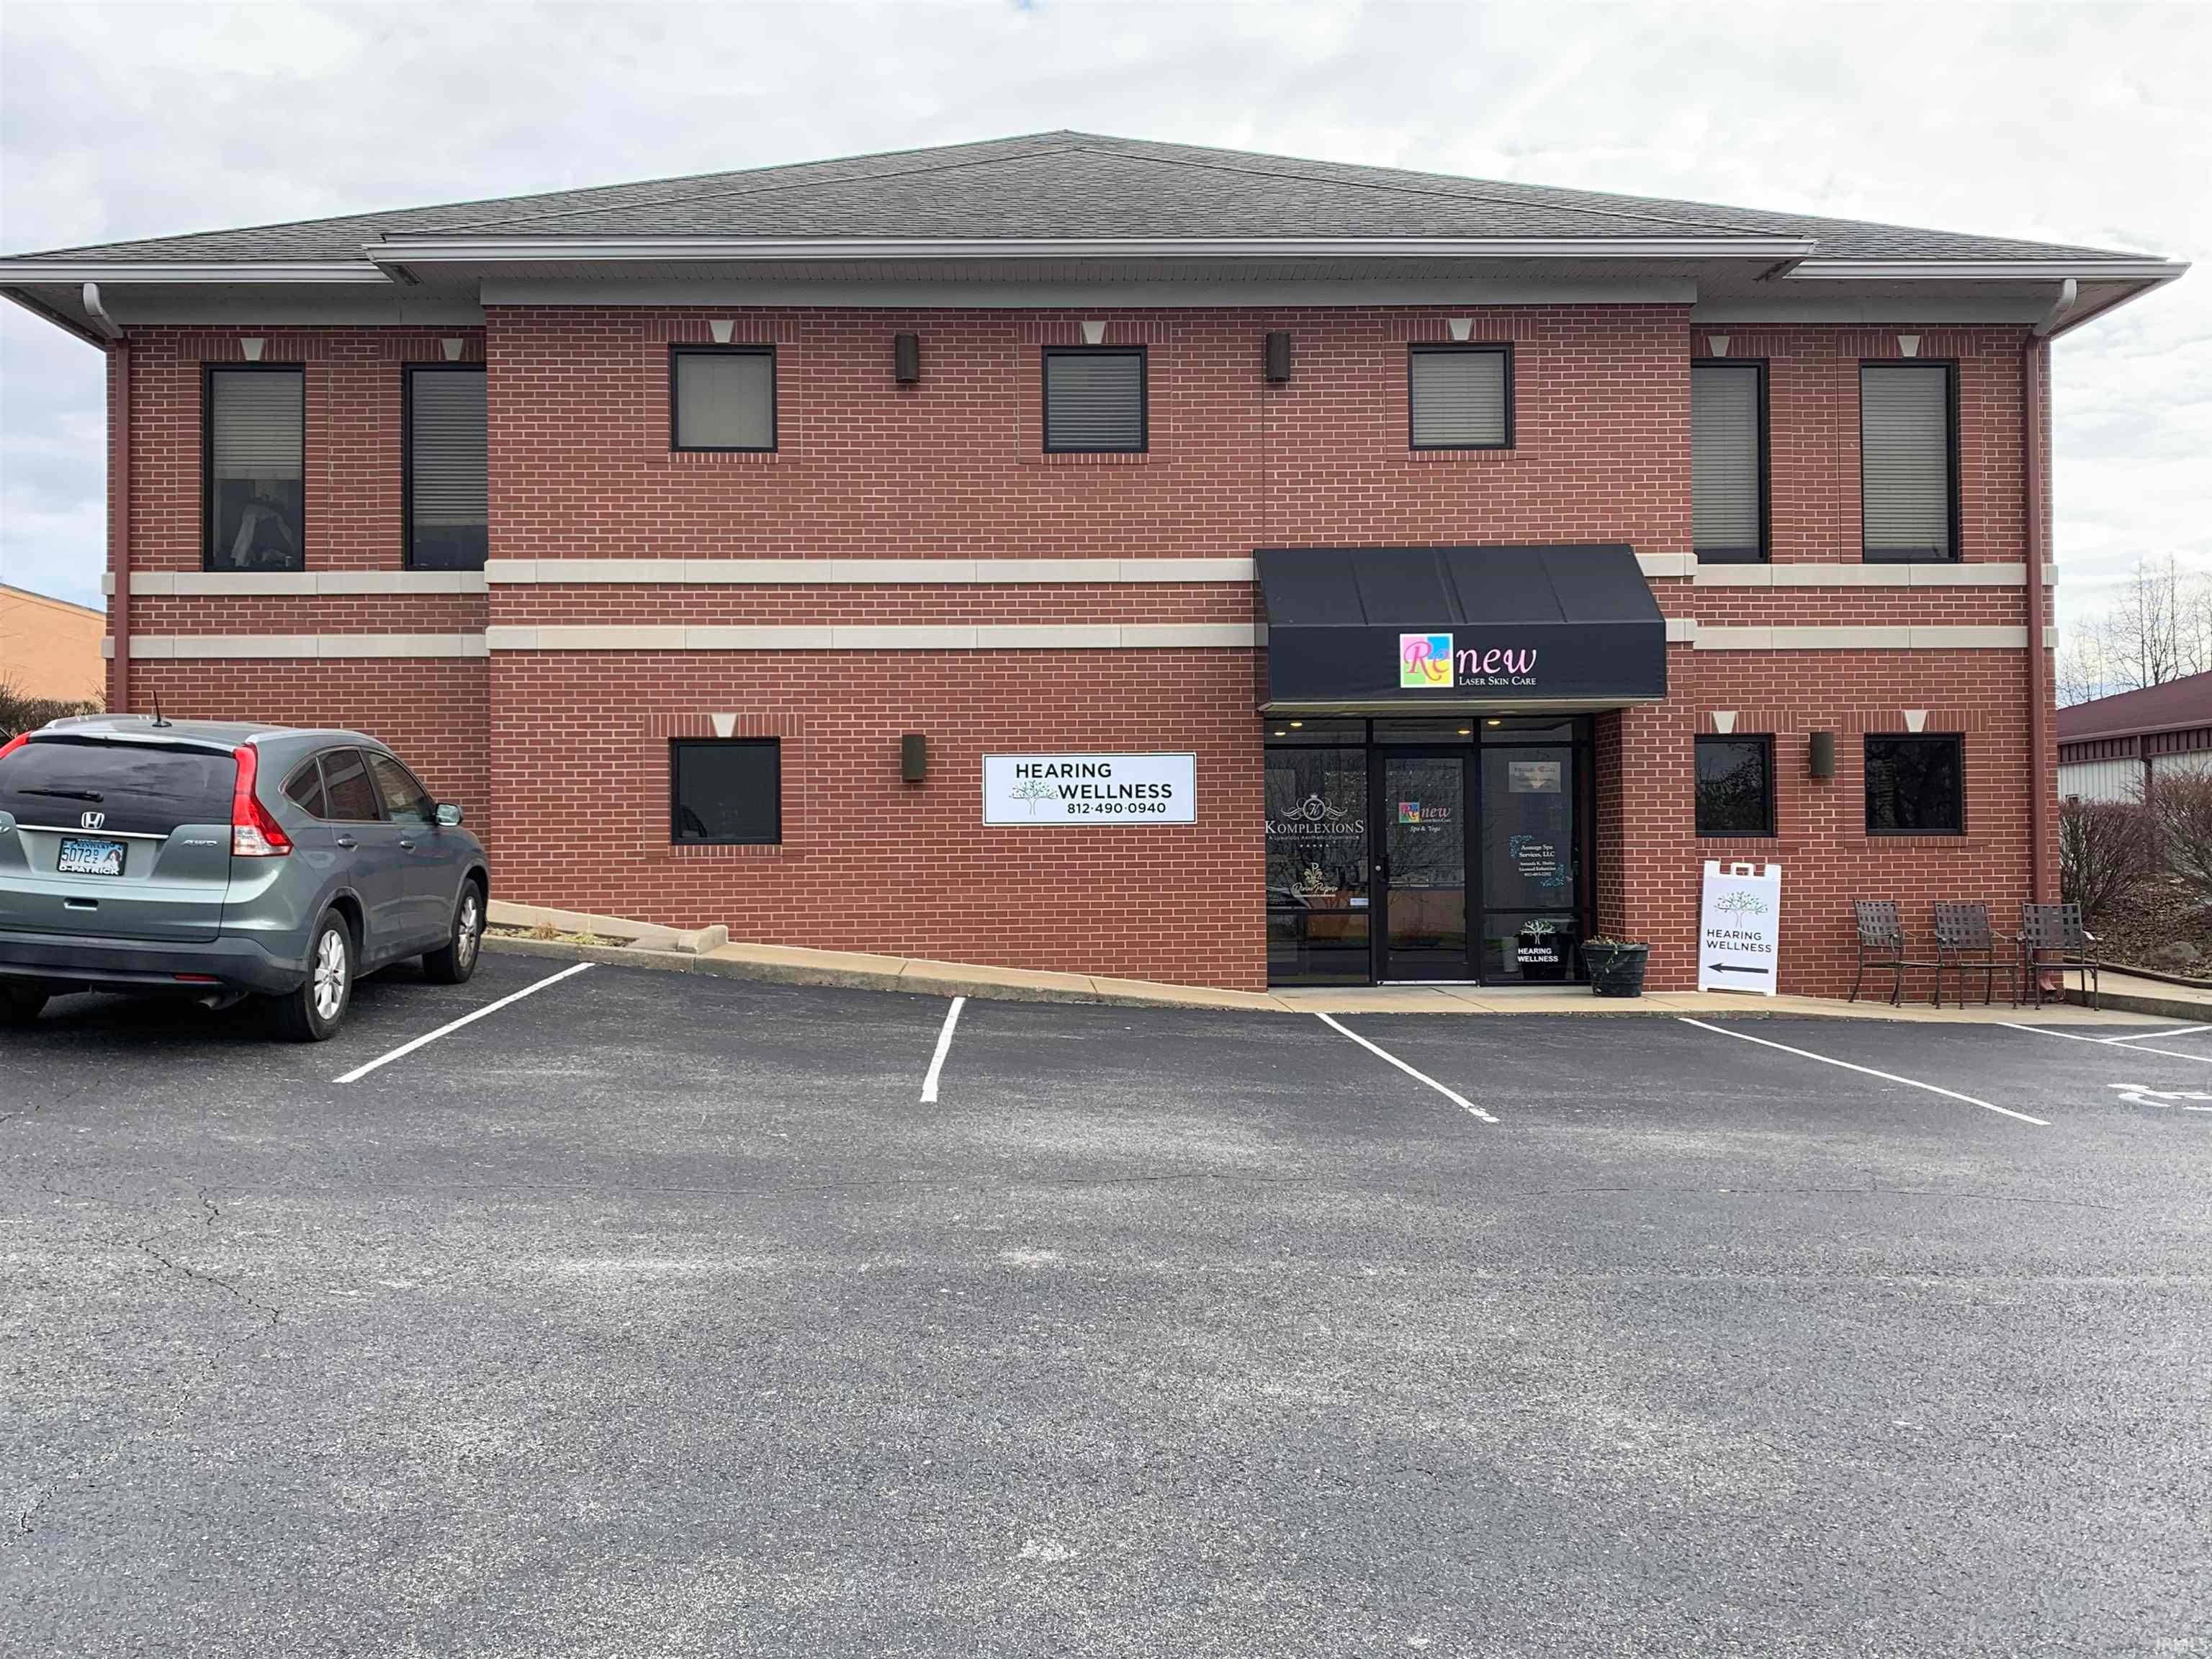 Comm / Ind Lease at 4166 Wyntree, Ste B - Office 3 Drive Newburgh, Indiana 47630 United States